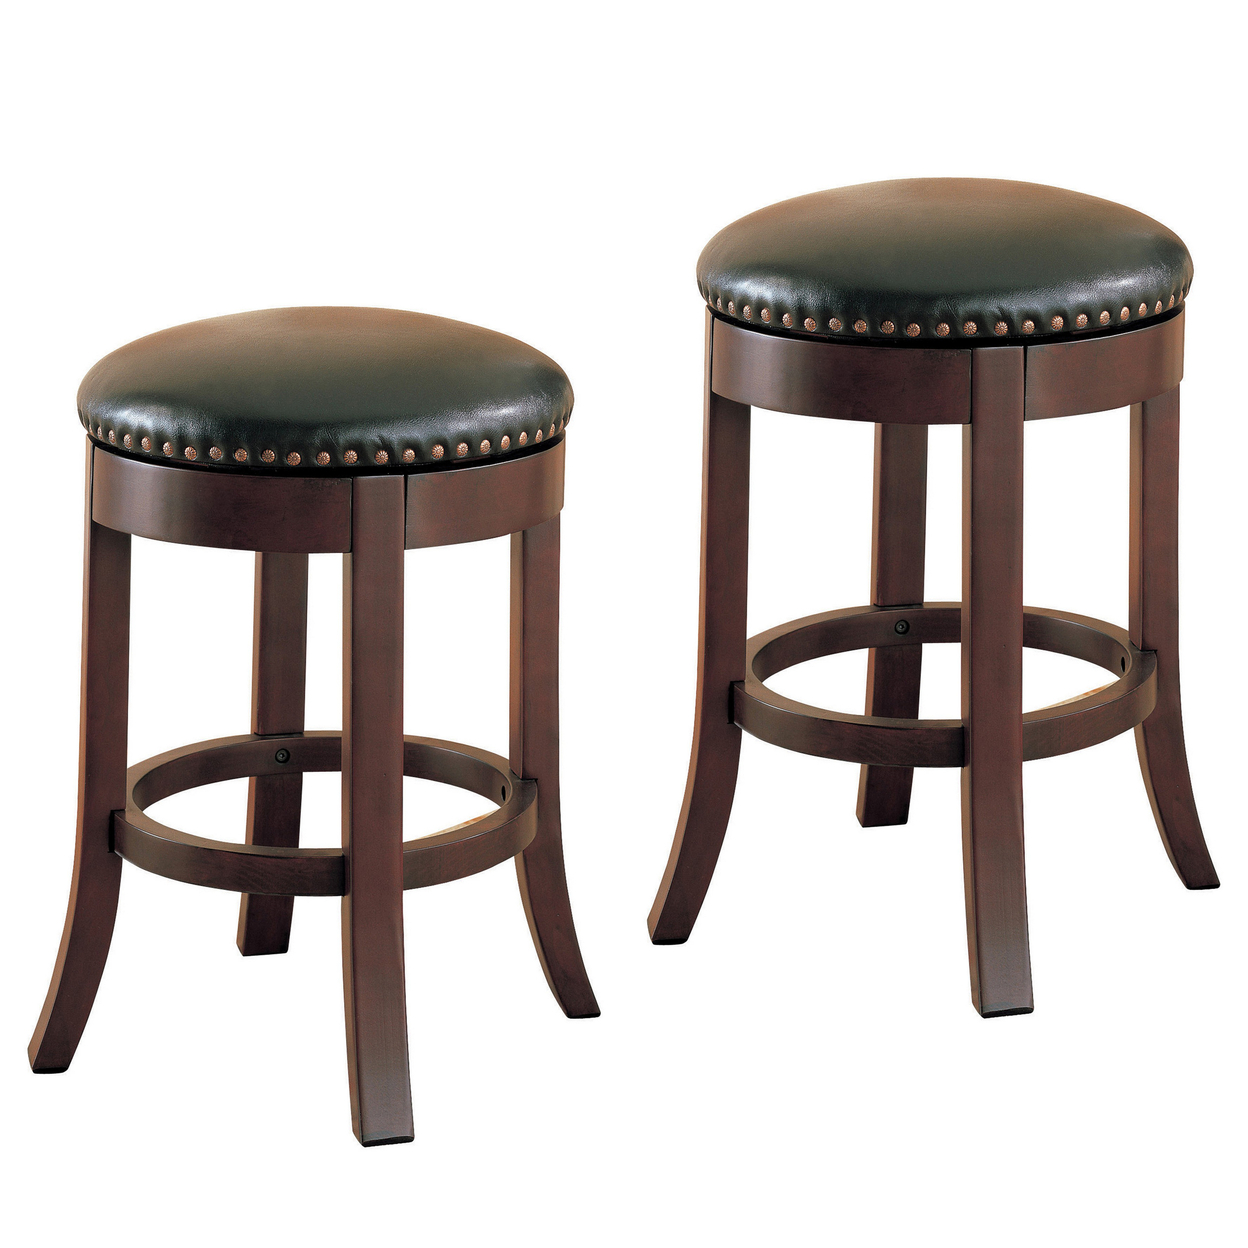 Round Wooden Counter Height Stool With Upholstered Seat, Brown, Set Of 2- Saltoro Sherpi